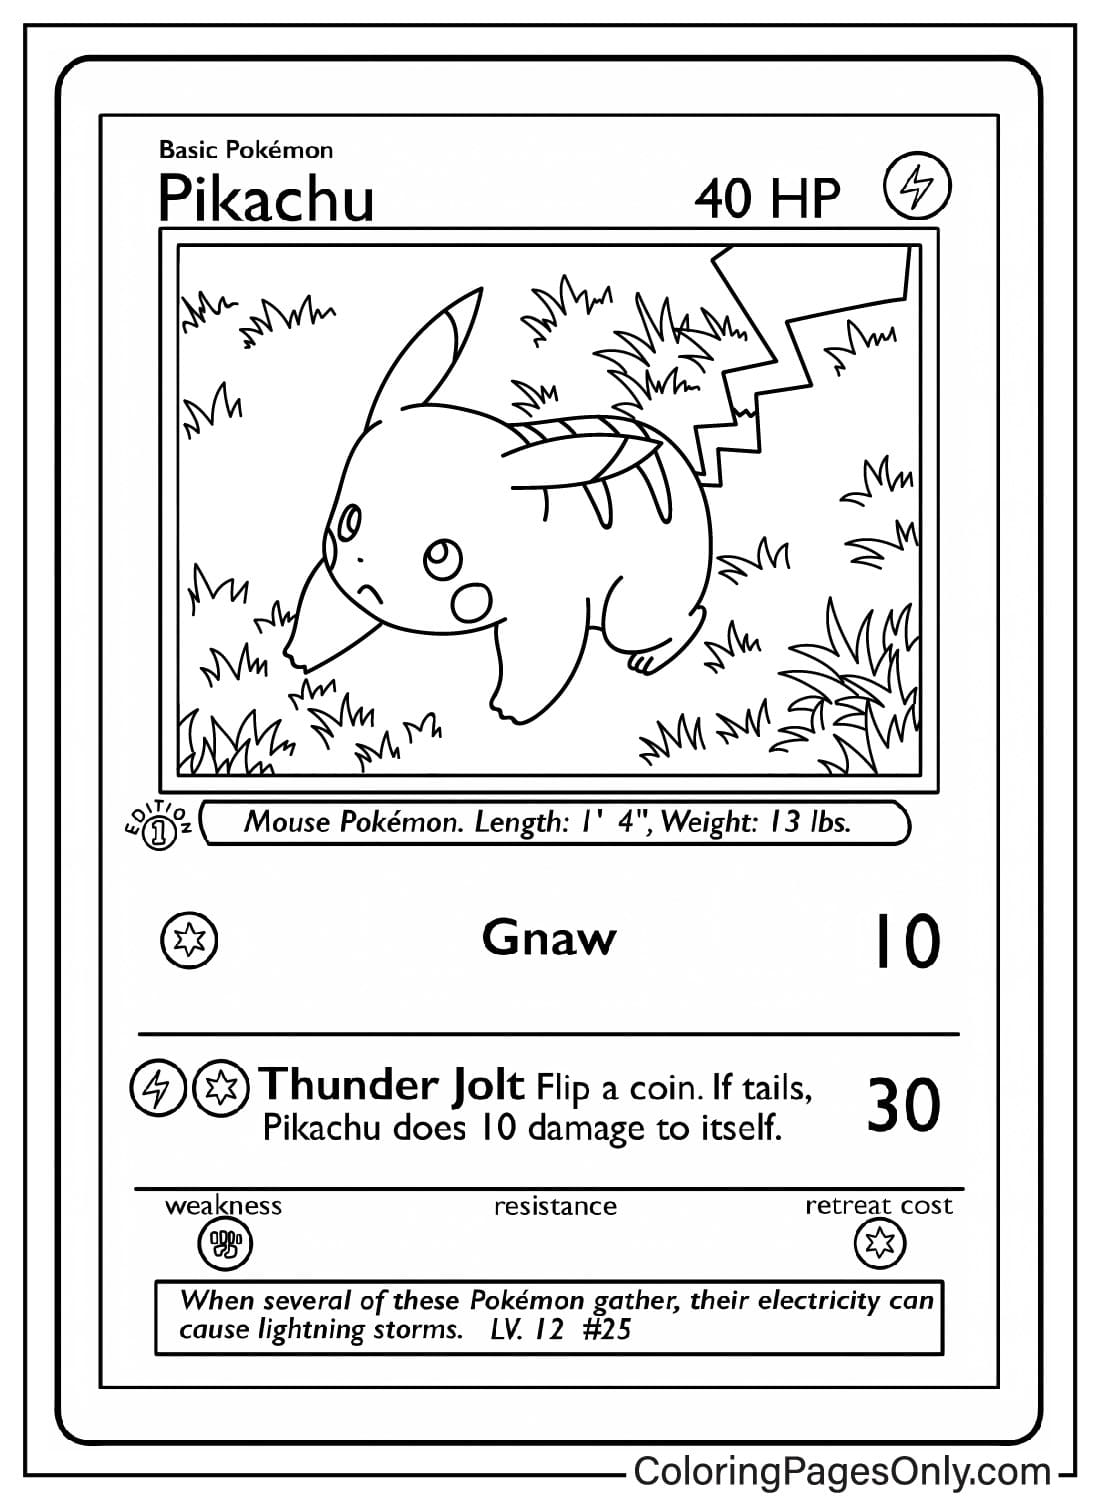 Pikachu Pokemon Card Coloring Page from Pokemon Card